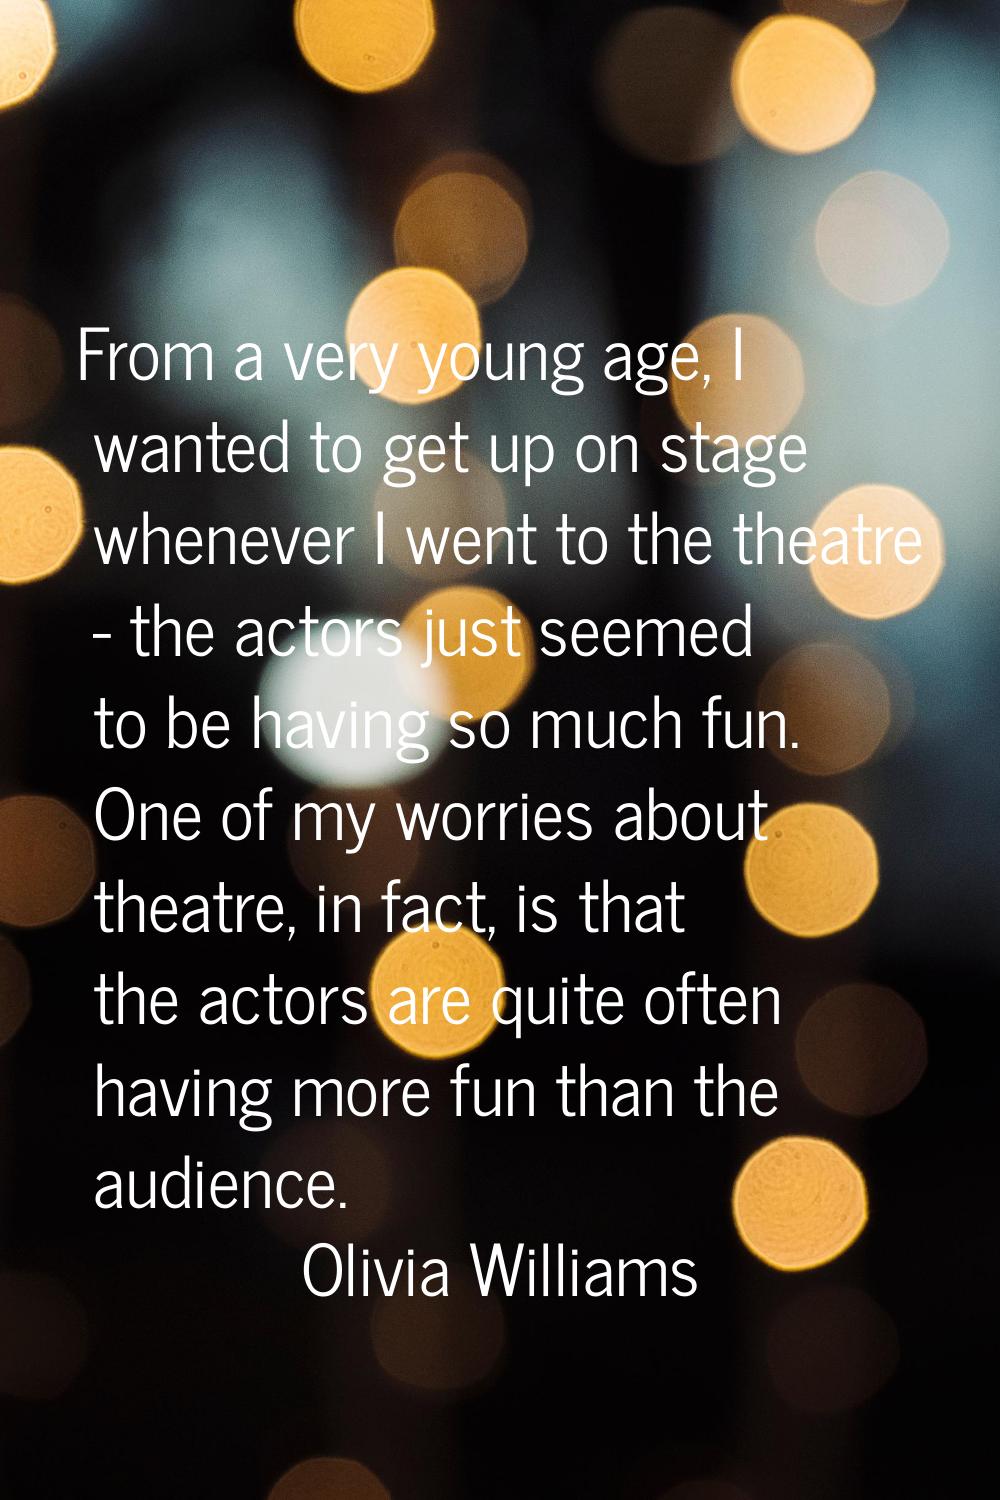 From a very young age, I wanted to get up on stage whenever I went to the theatre - the actors just